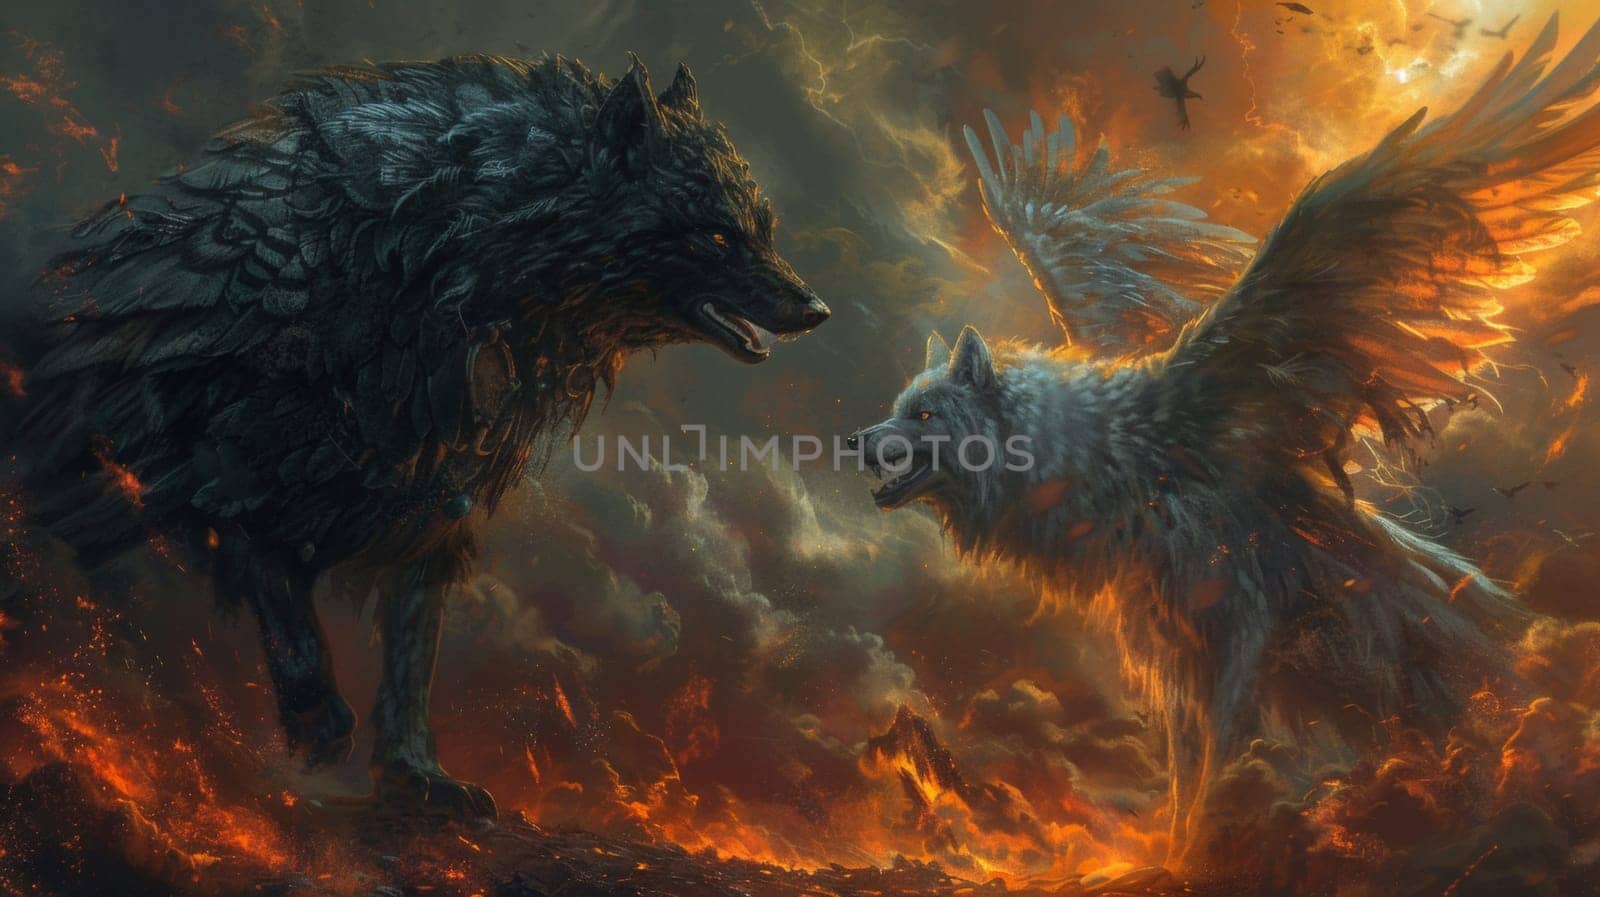 Two wolves fighting in a fiery landscape with flames and fire, AI by starush